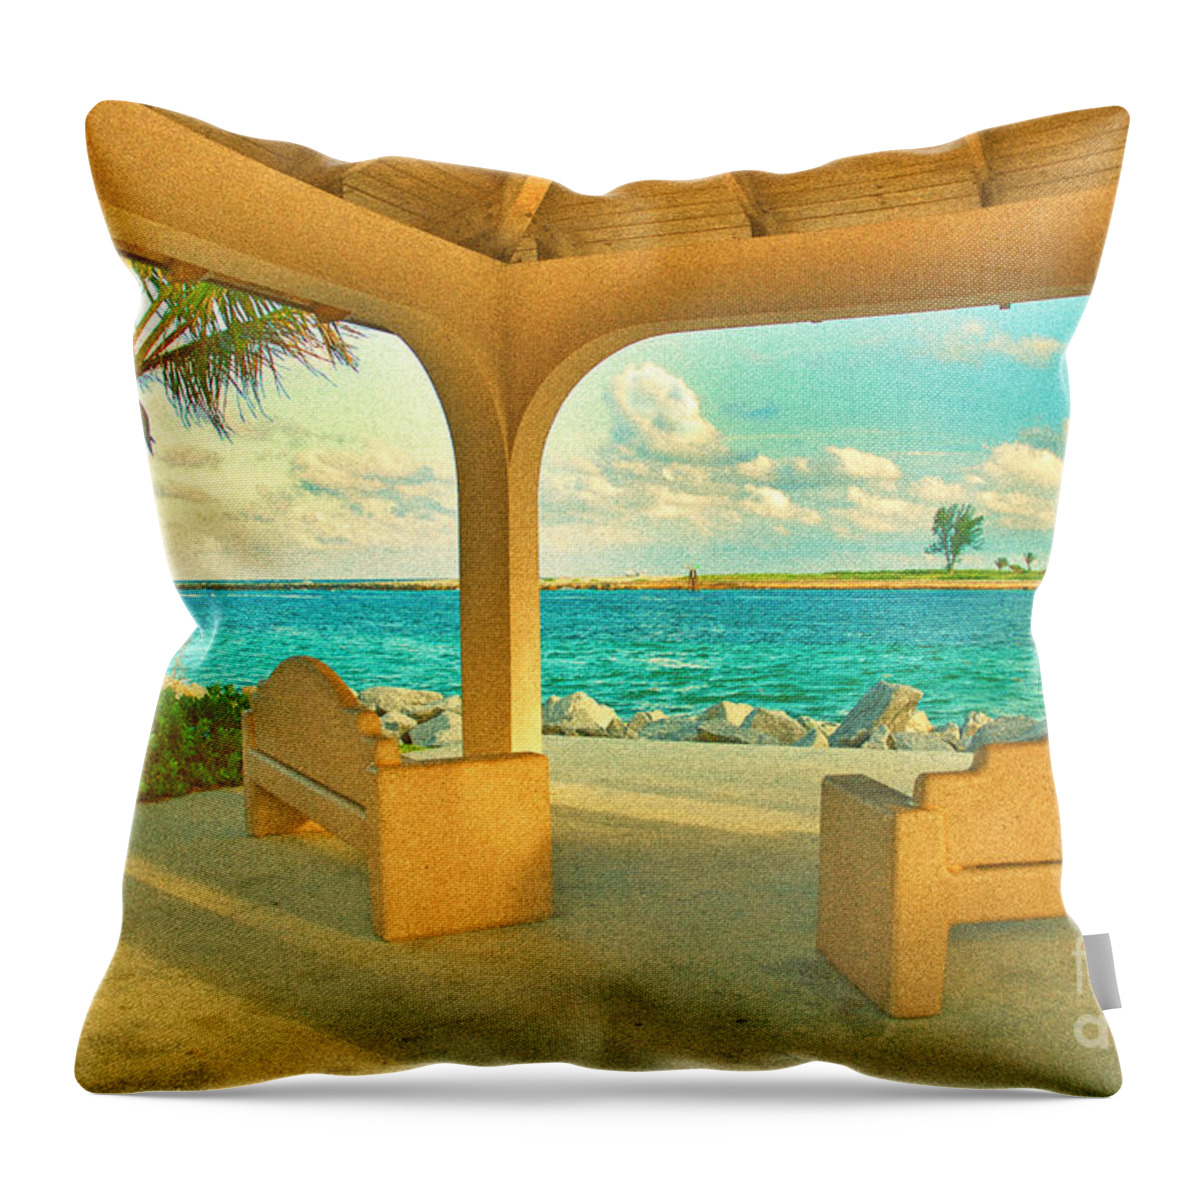 Singer Island Throw Pillow featuring the photograph 31- Respite by Joseph Keane